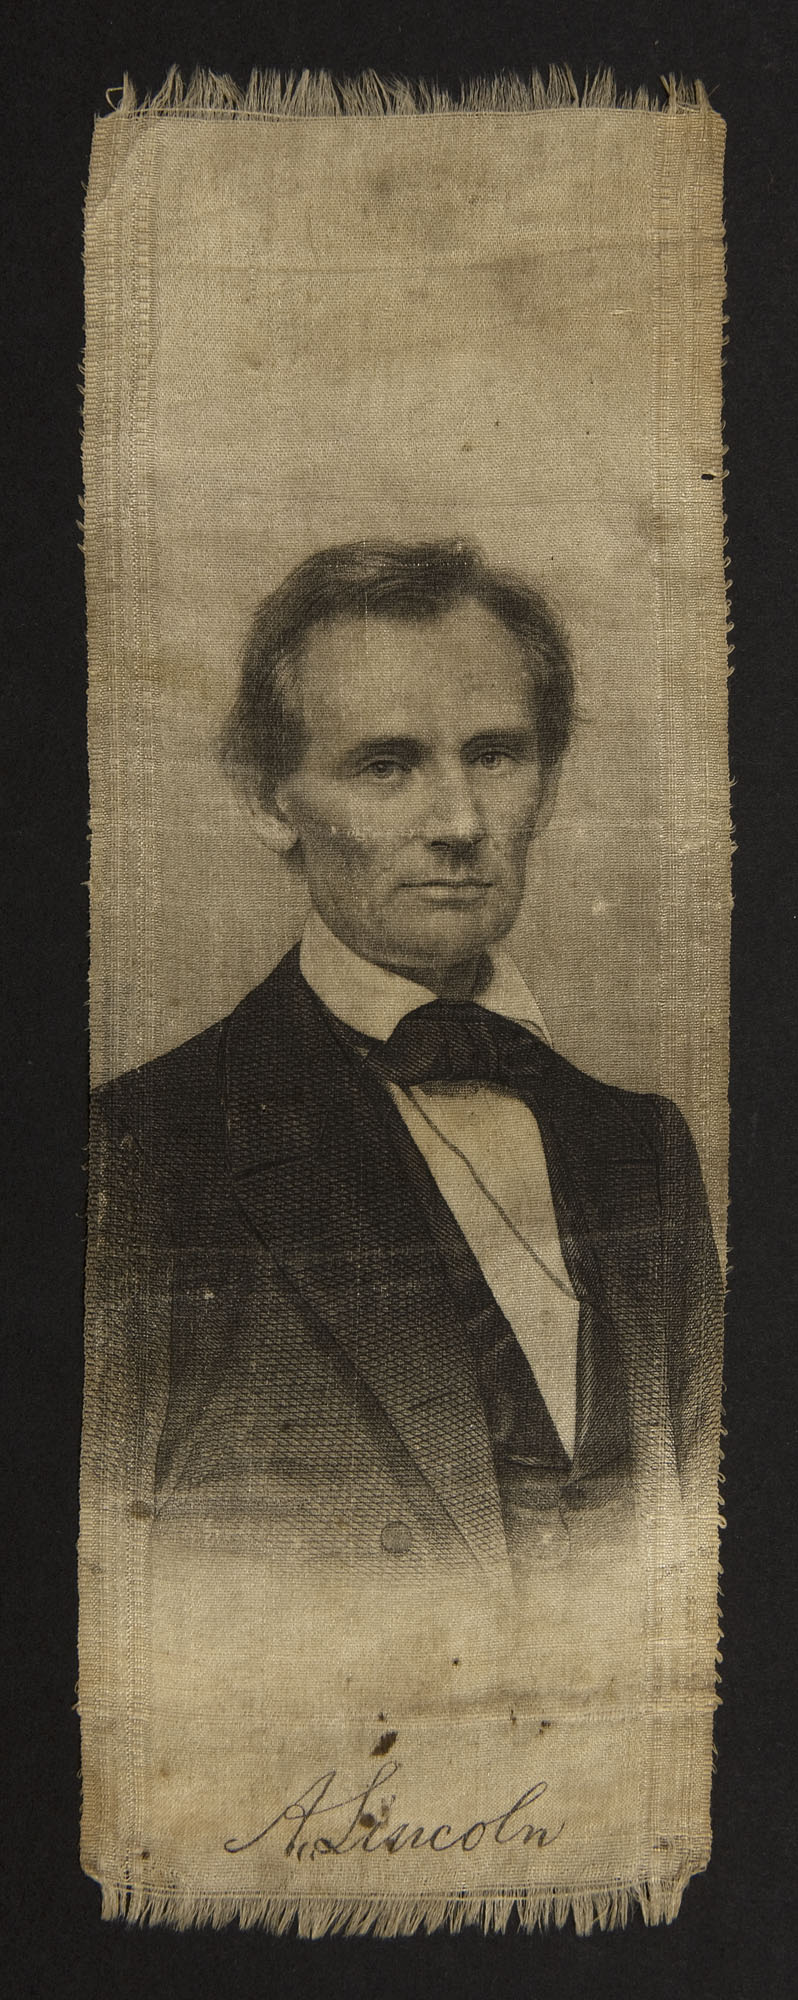 John Chester Buttre, Campaign ribbon, A. Lincoln, 1860, 7.5 x 2.5 inches (Chicago Public Library)